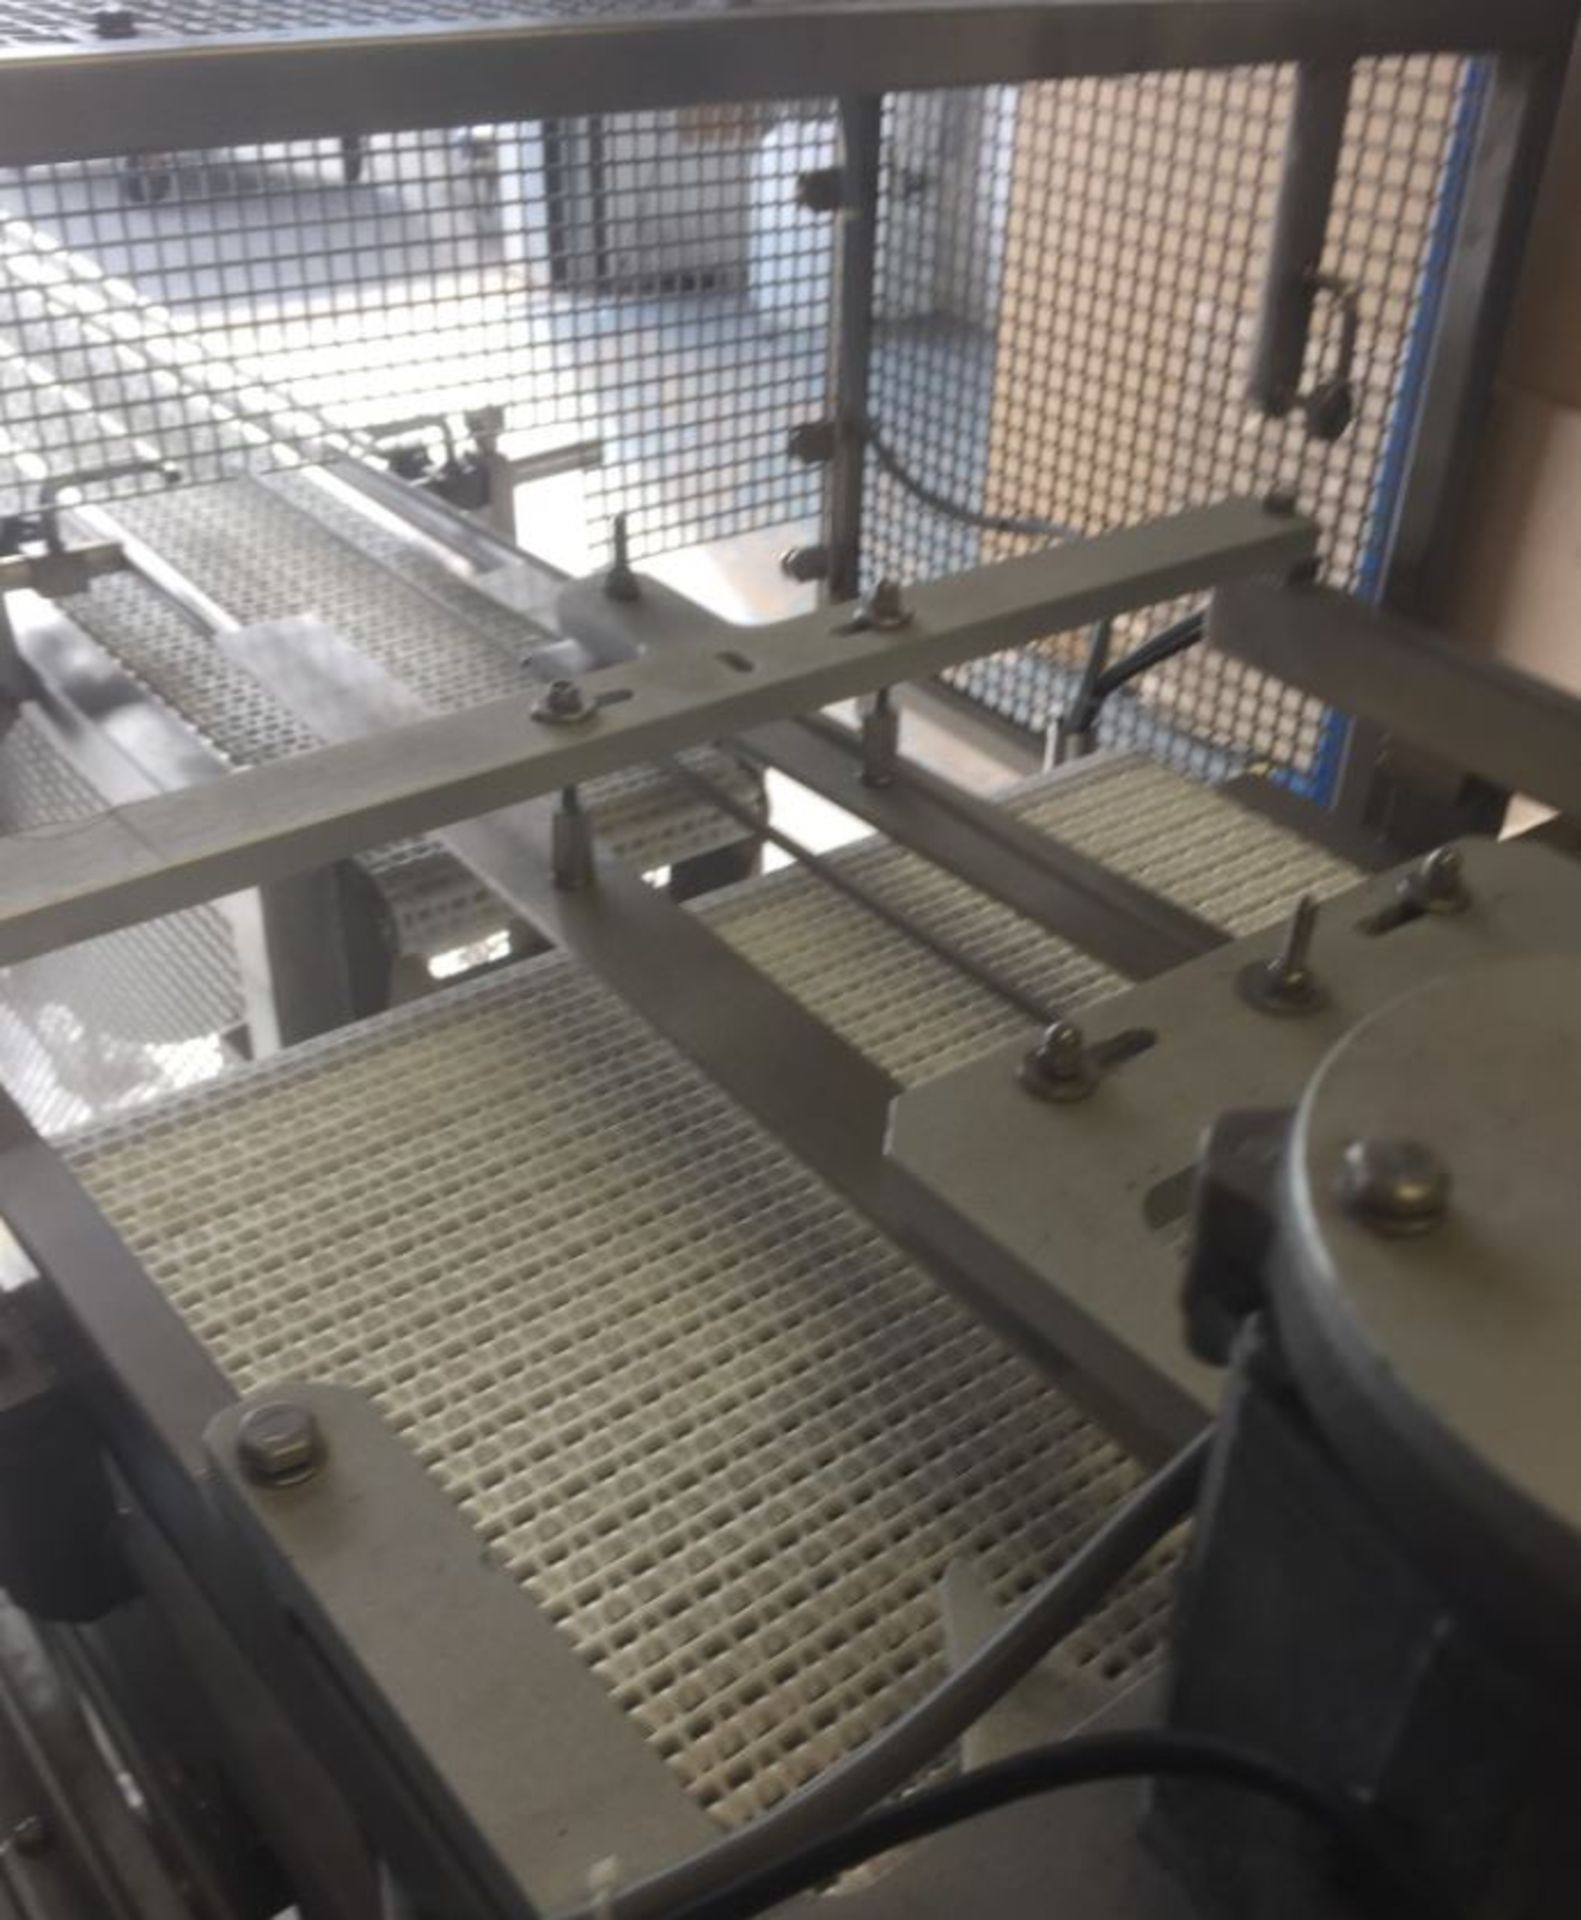 WARD-BEKKER TWIN CHECK-WEIGHER/METAL DETAL DETECTOR WITH FORTRESS METAL DETECTOR AND CONVEYORS - Image 13 of 20